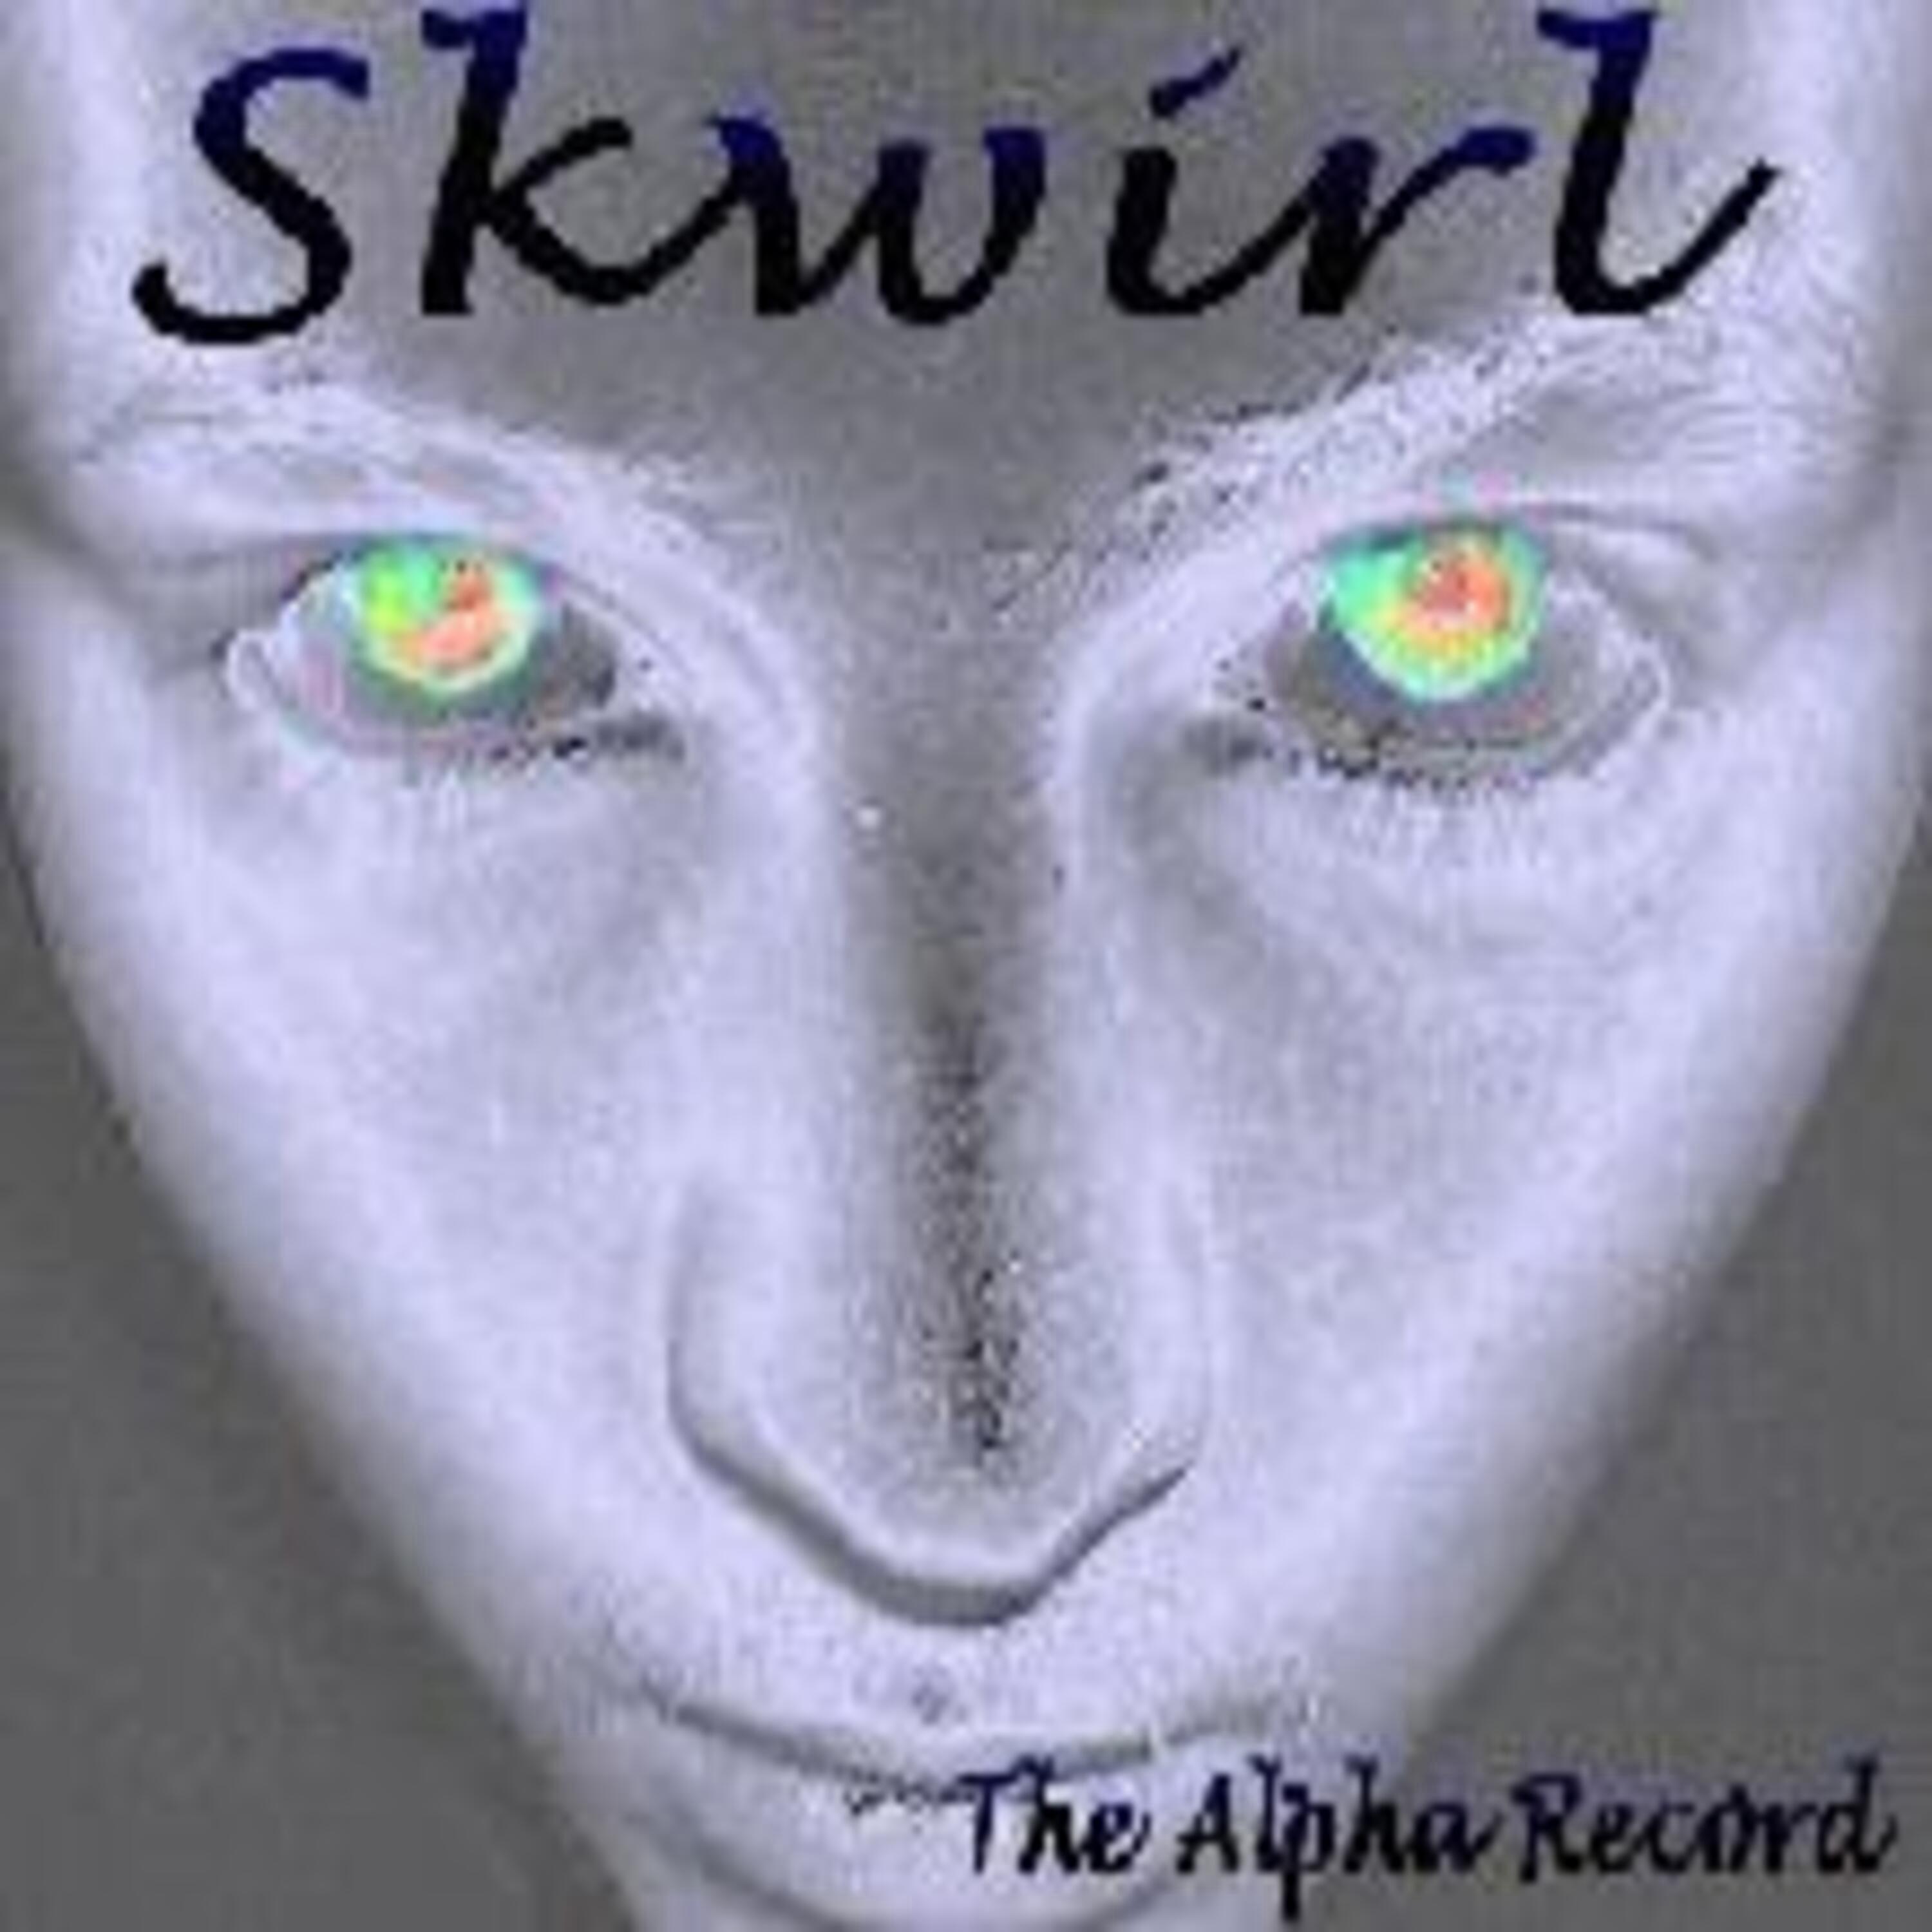 Skwirl - How Could I